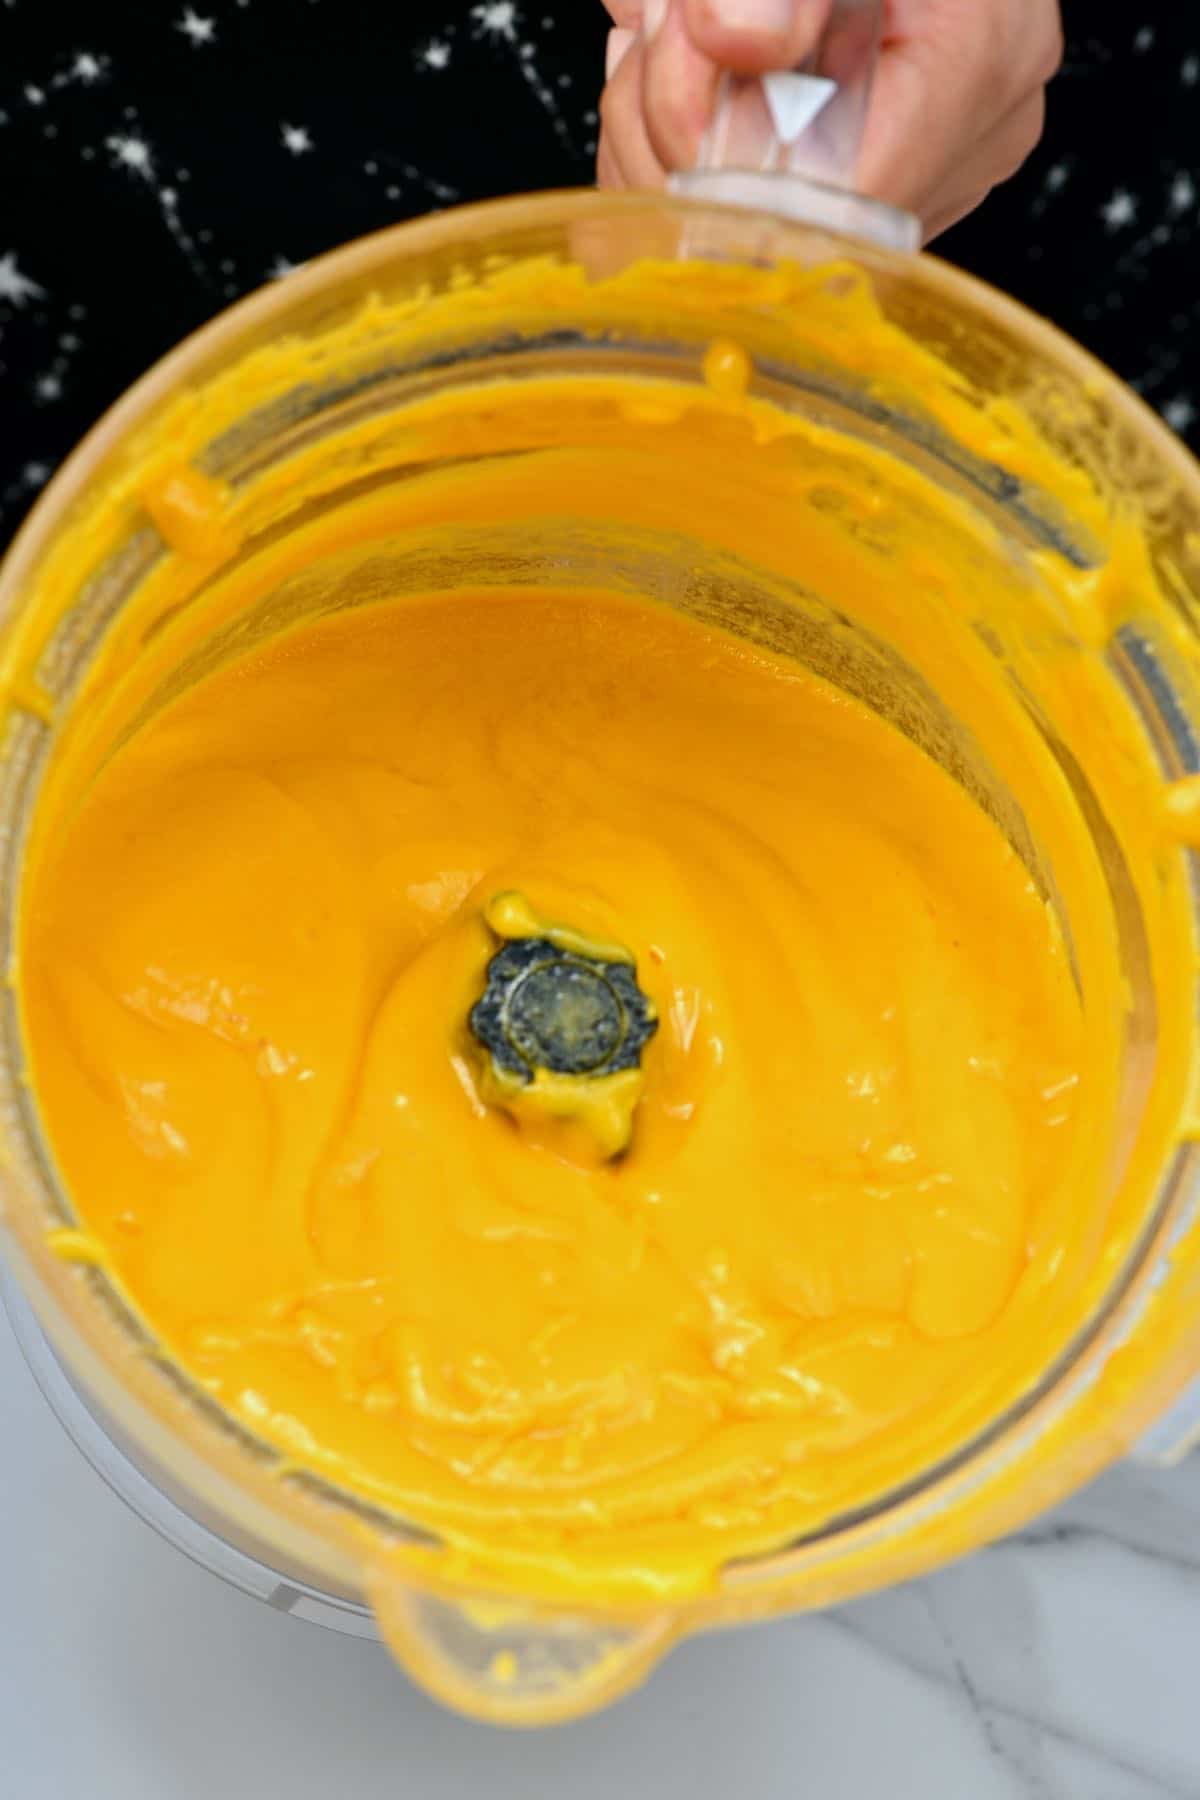 Mango blended into a puree